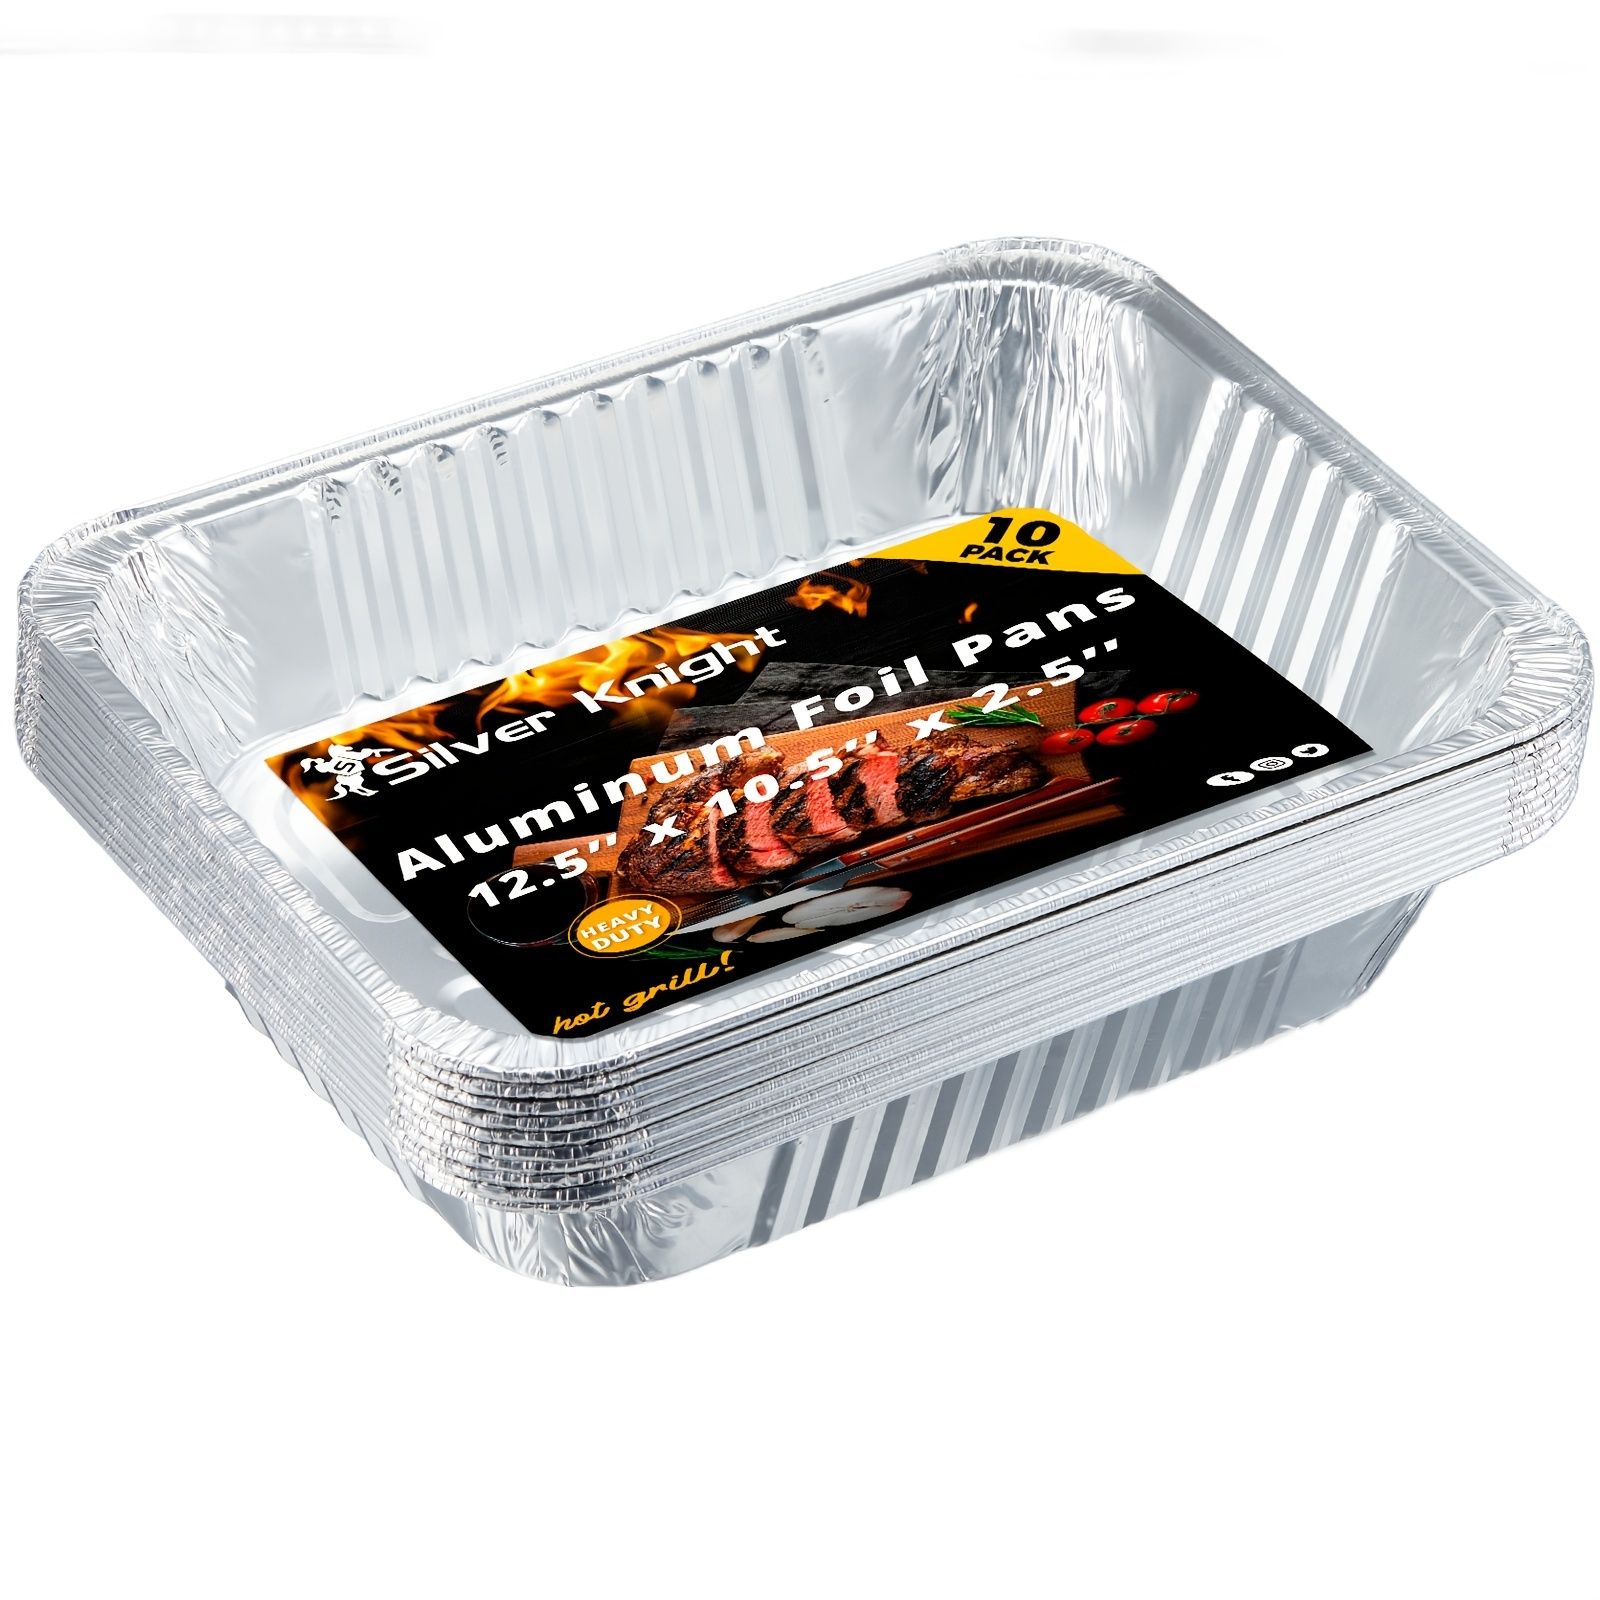  8x8 Disposable Aluminum Pans With Lids - 10 Pack Foil Pans For  Cooking, Baking Cakes, Roasting & Homemade Breads - Disposable Food  Containers With Foil Lids: Home & Kitchen